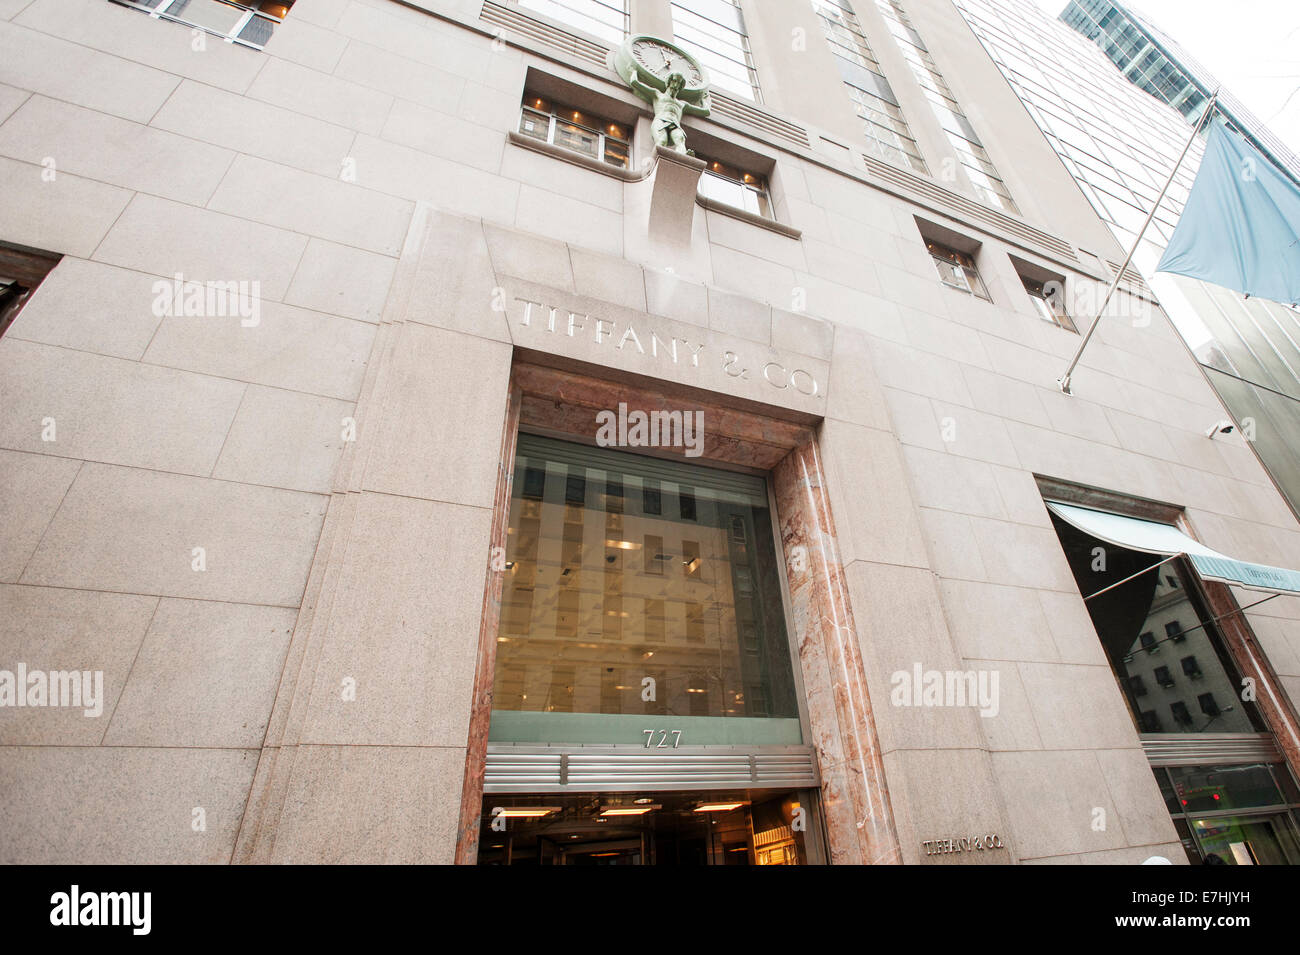 Tiffany Co Flagship Store On Fifth Ave Nyc Stock Photo - Download Image Now  - Tiffany & Co, Tiffany's - Manhattan, Fifth Avenue - iStock